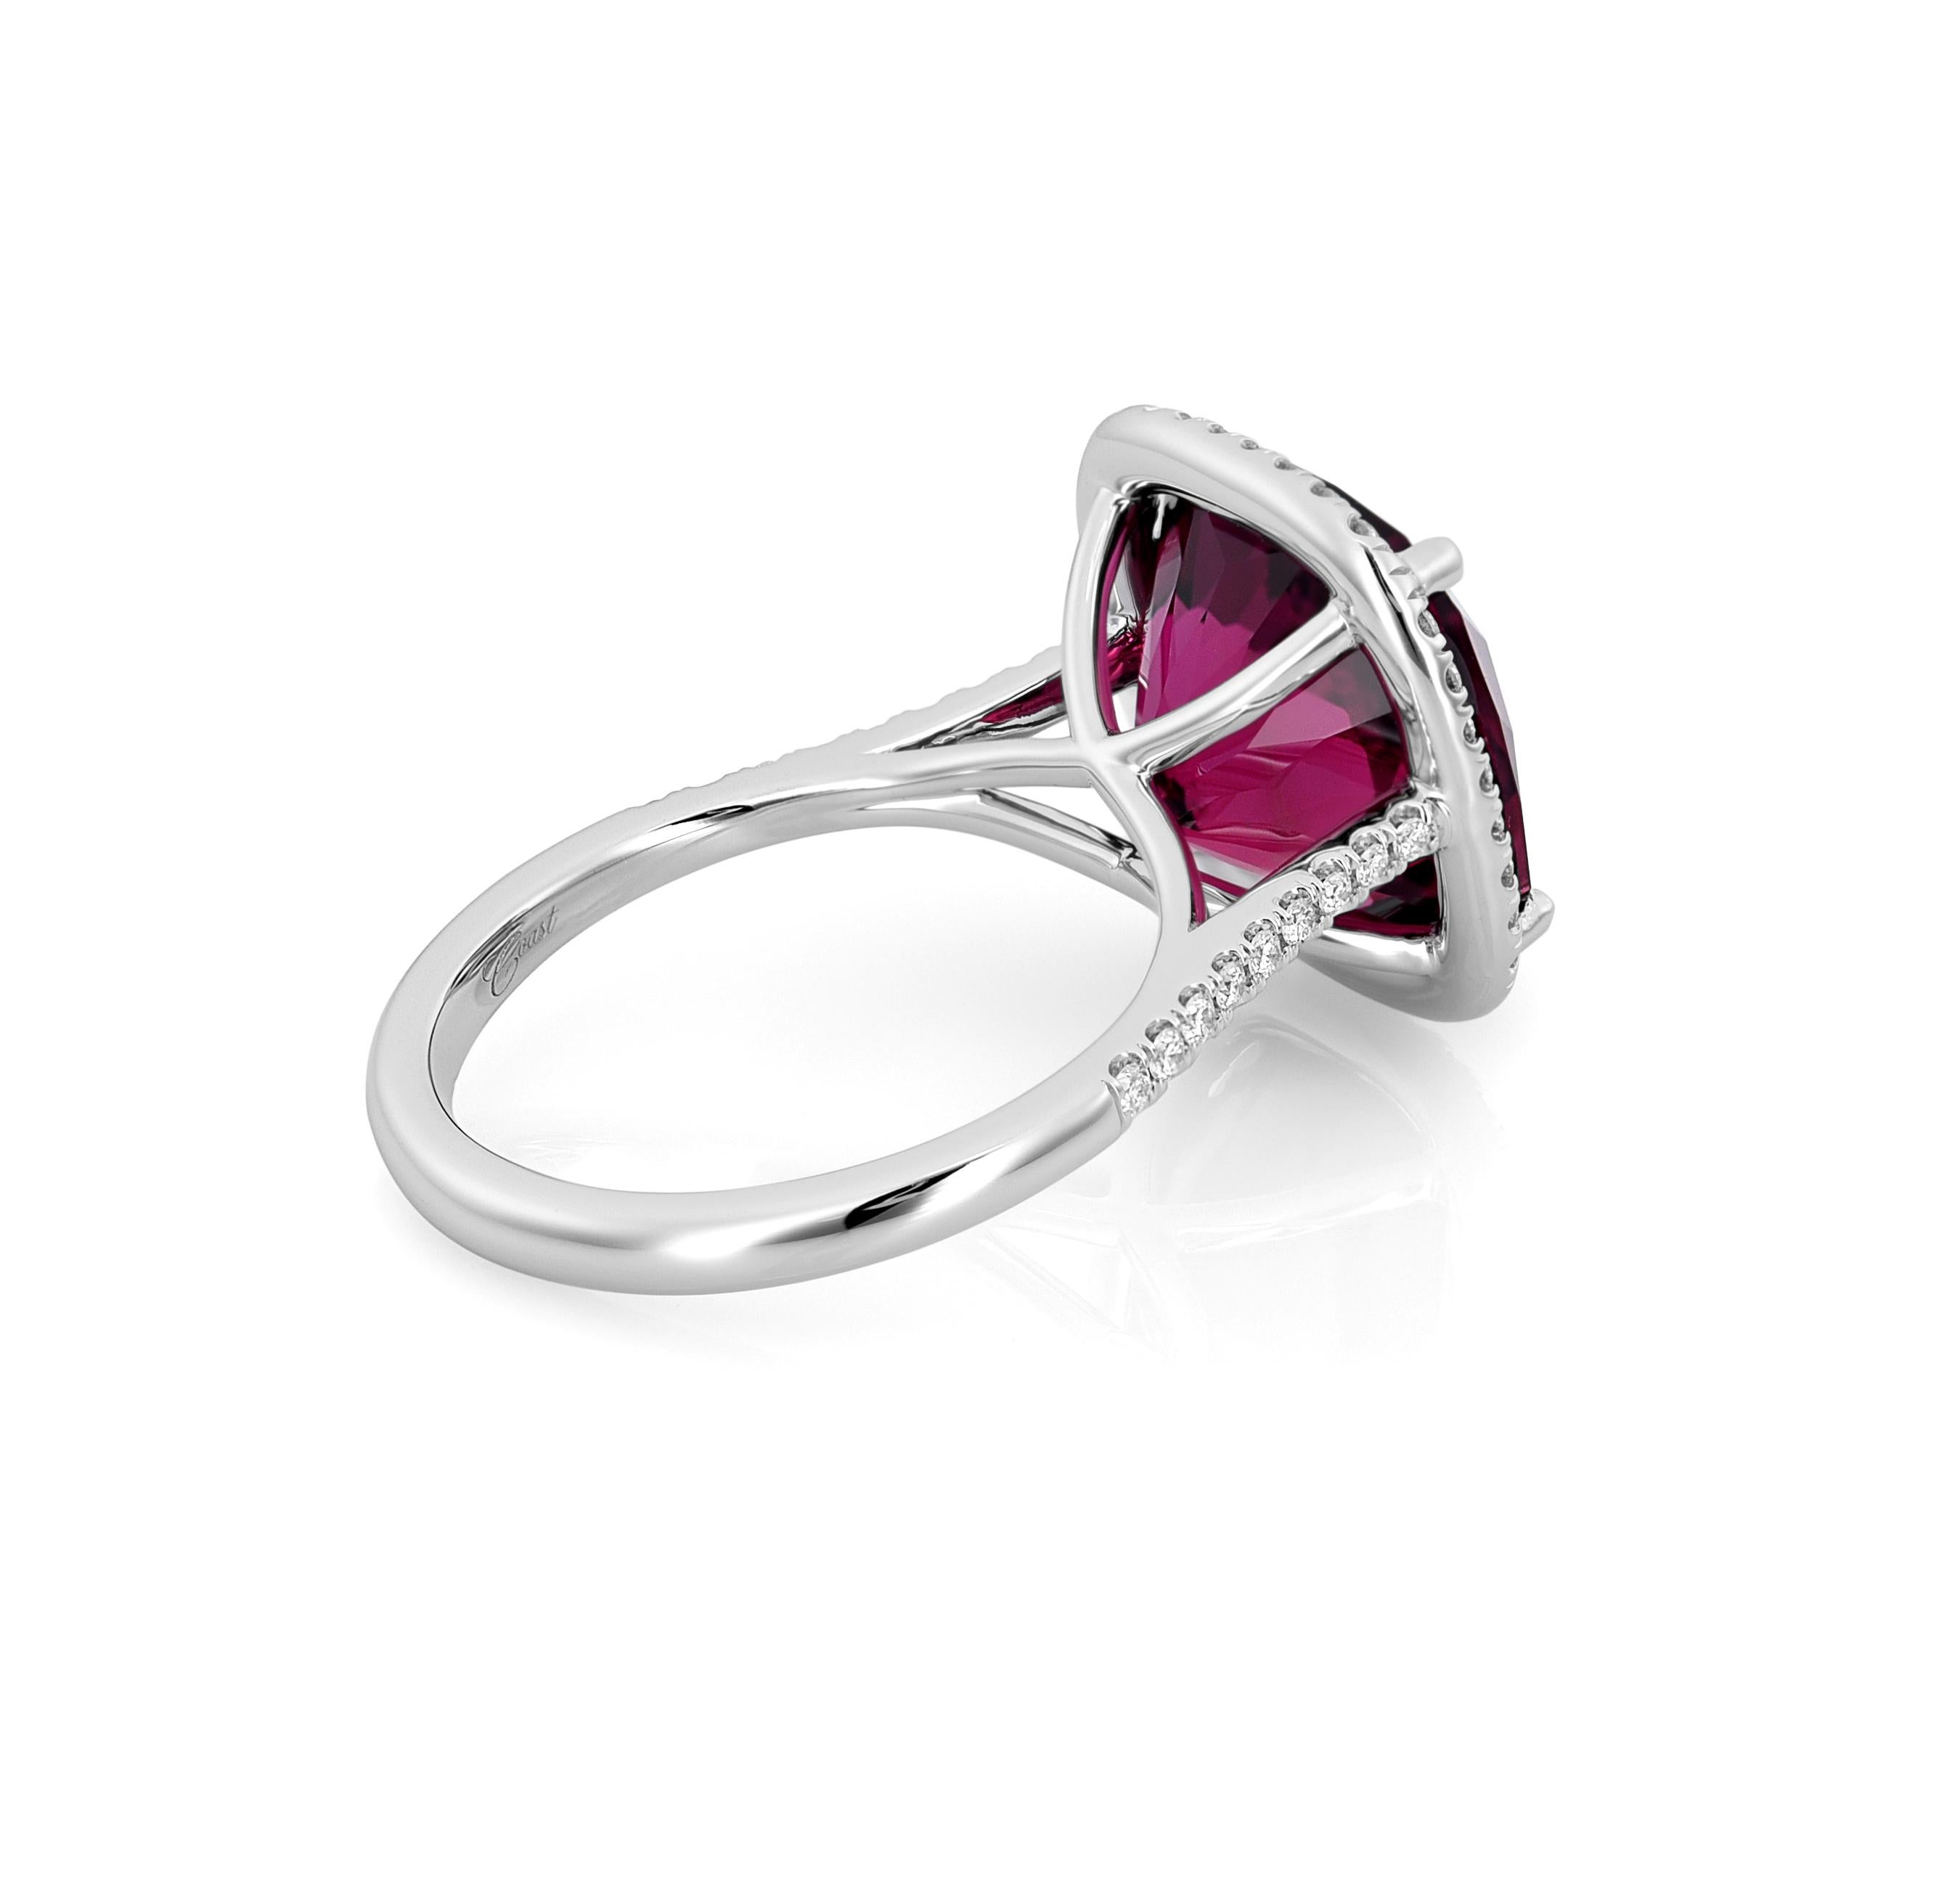 Mixed Cut 7.78 Carats Natural Red Tourmaline Diamonds set in 14K White Gold Rings